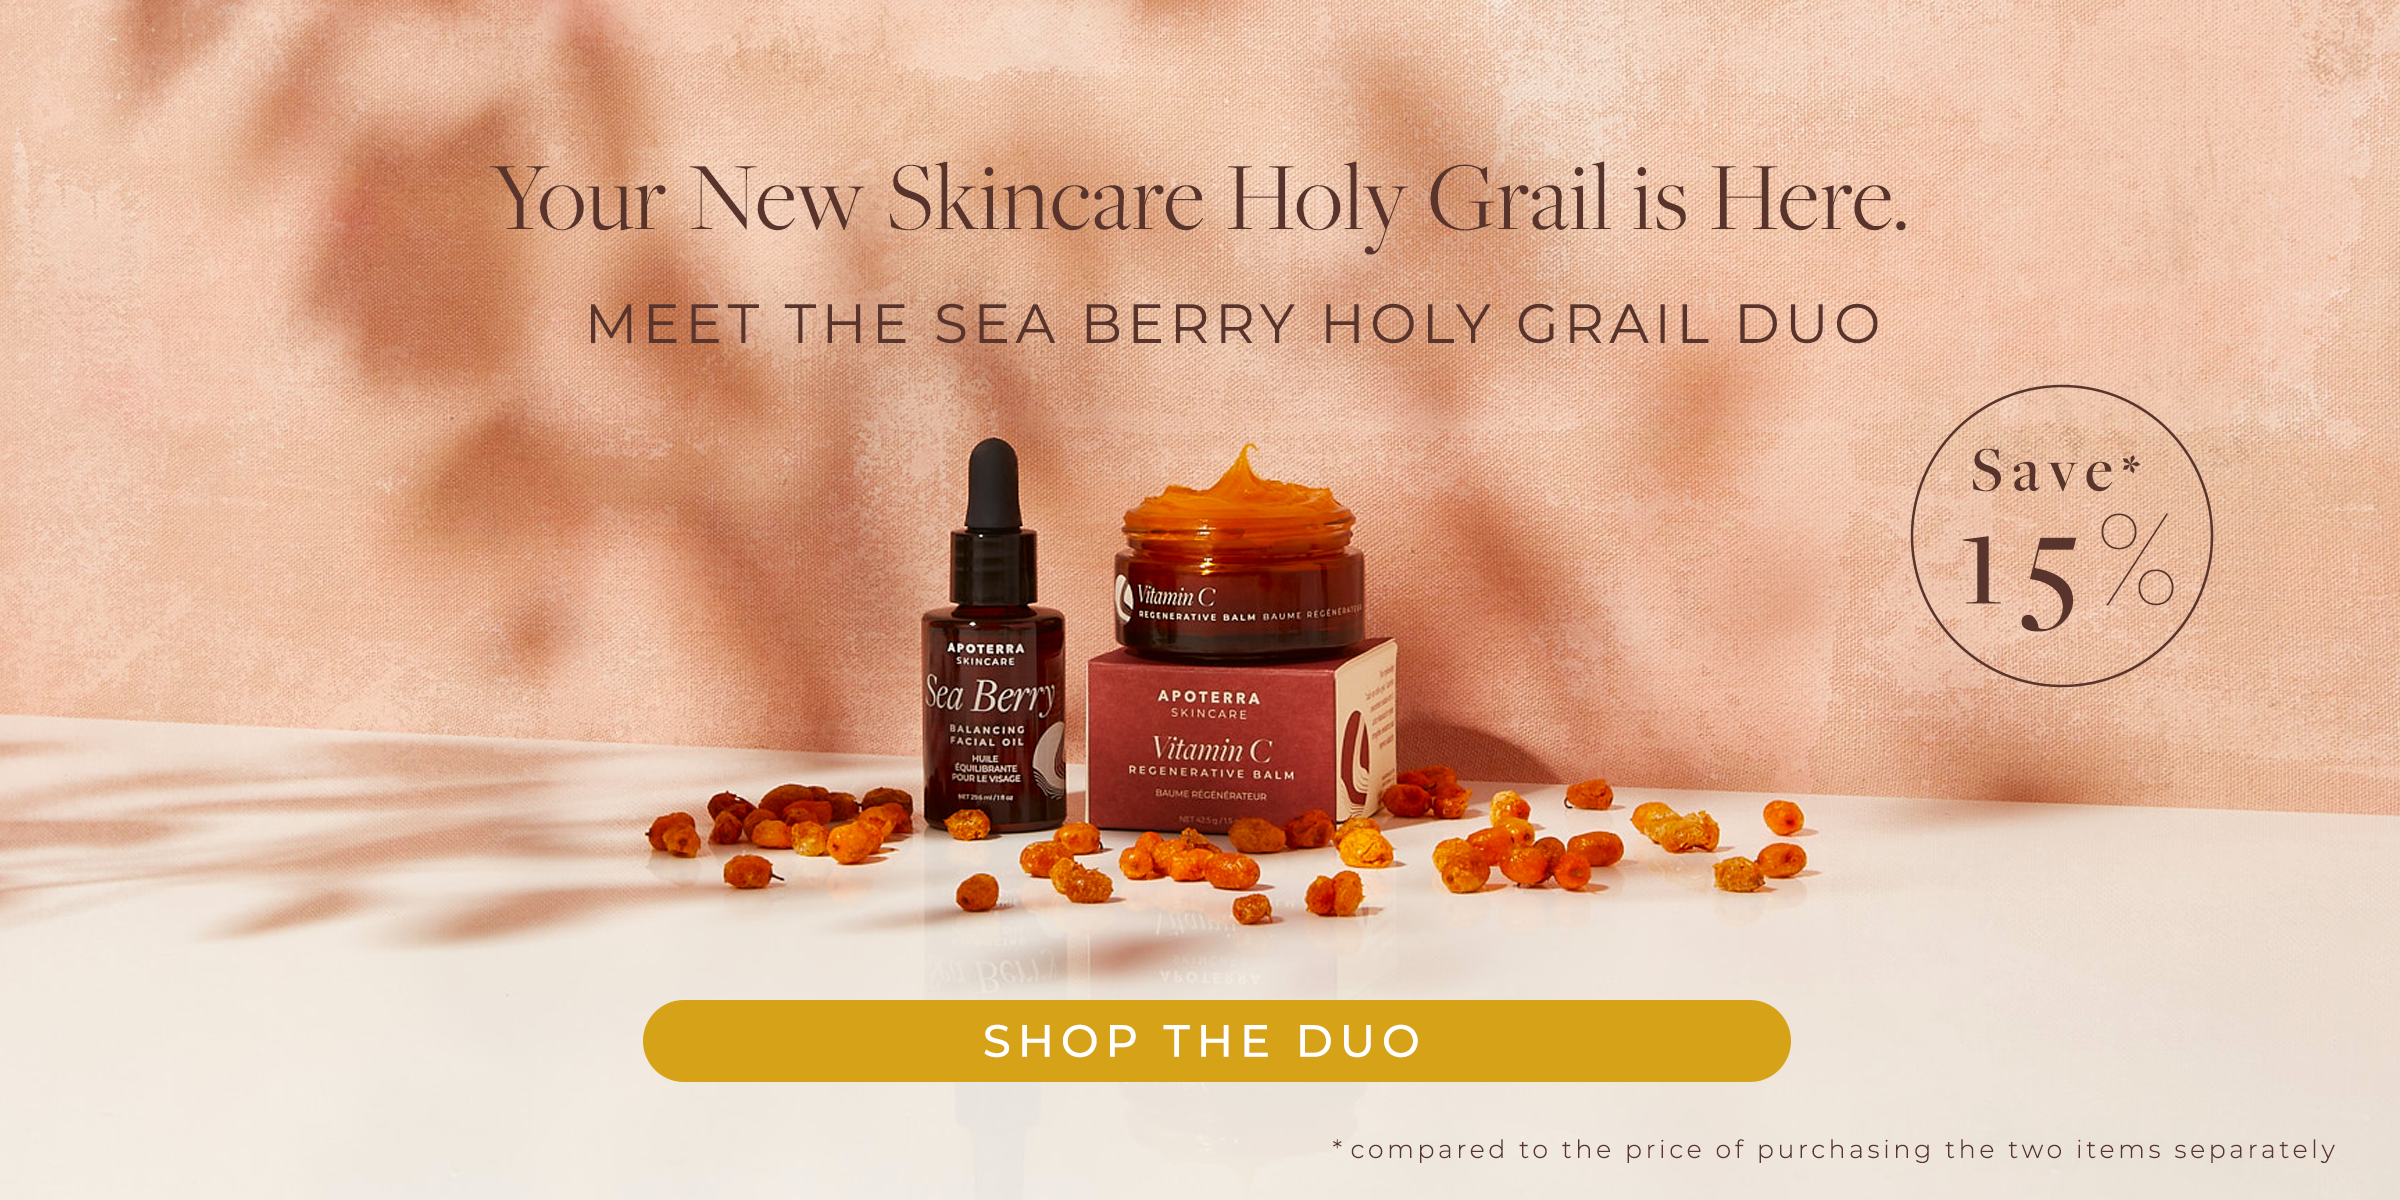 Sea Berry Duo Landing Page Lead 2.png__PID:9fc837ba-313e-43c1-8c4a-3f52958927ae